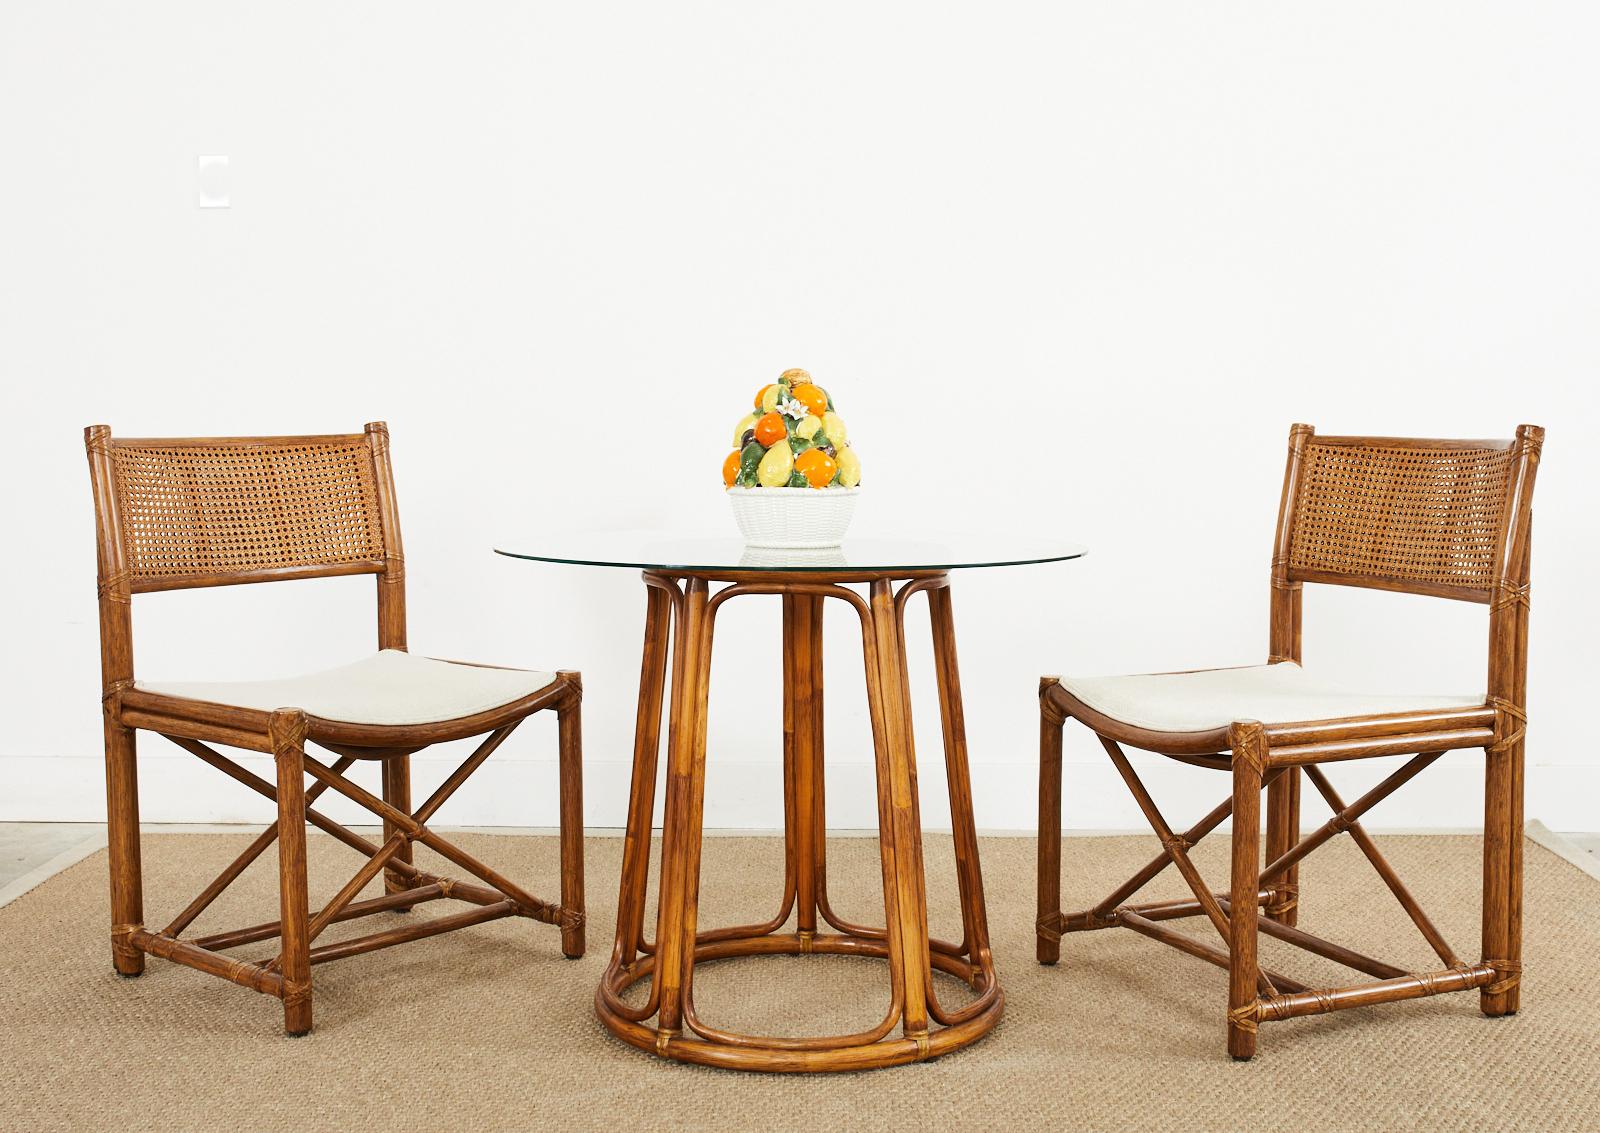 Genuine and rare pair of rattan framed dining chairs made in the California organic modern style by McGuire. The chairs feature a double caned back and leather rawhide laces on the exposed joints. Newly upholstered with a rich cream and white fabric